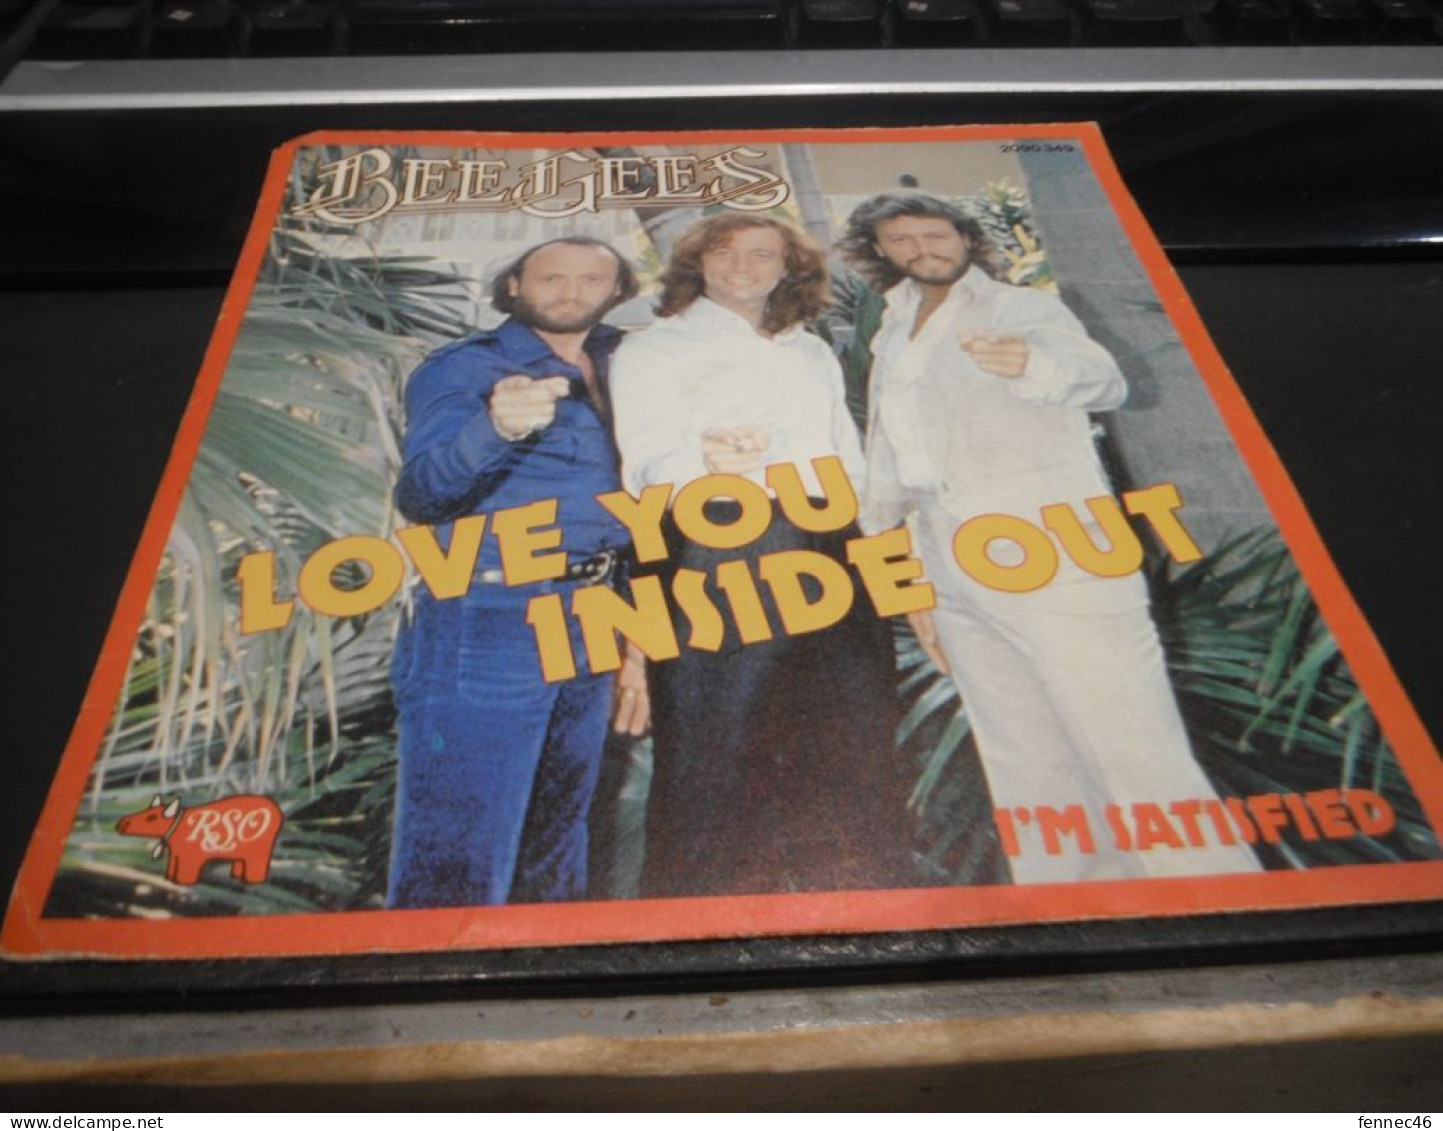 *  (vinyle - 45t) - BEE GEES - Love You Inside Out - I'm Satisfied - Autres - Musique Anglaise